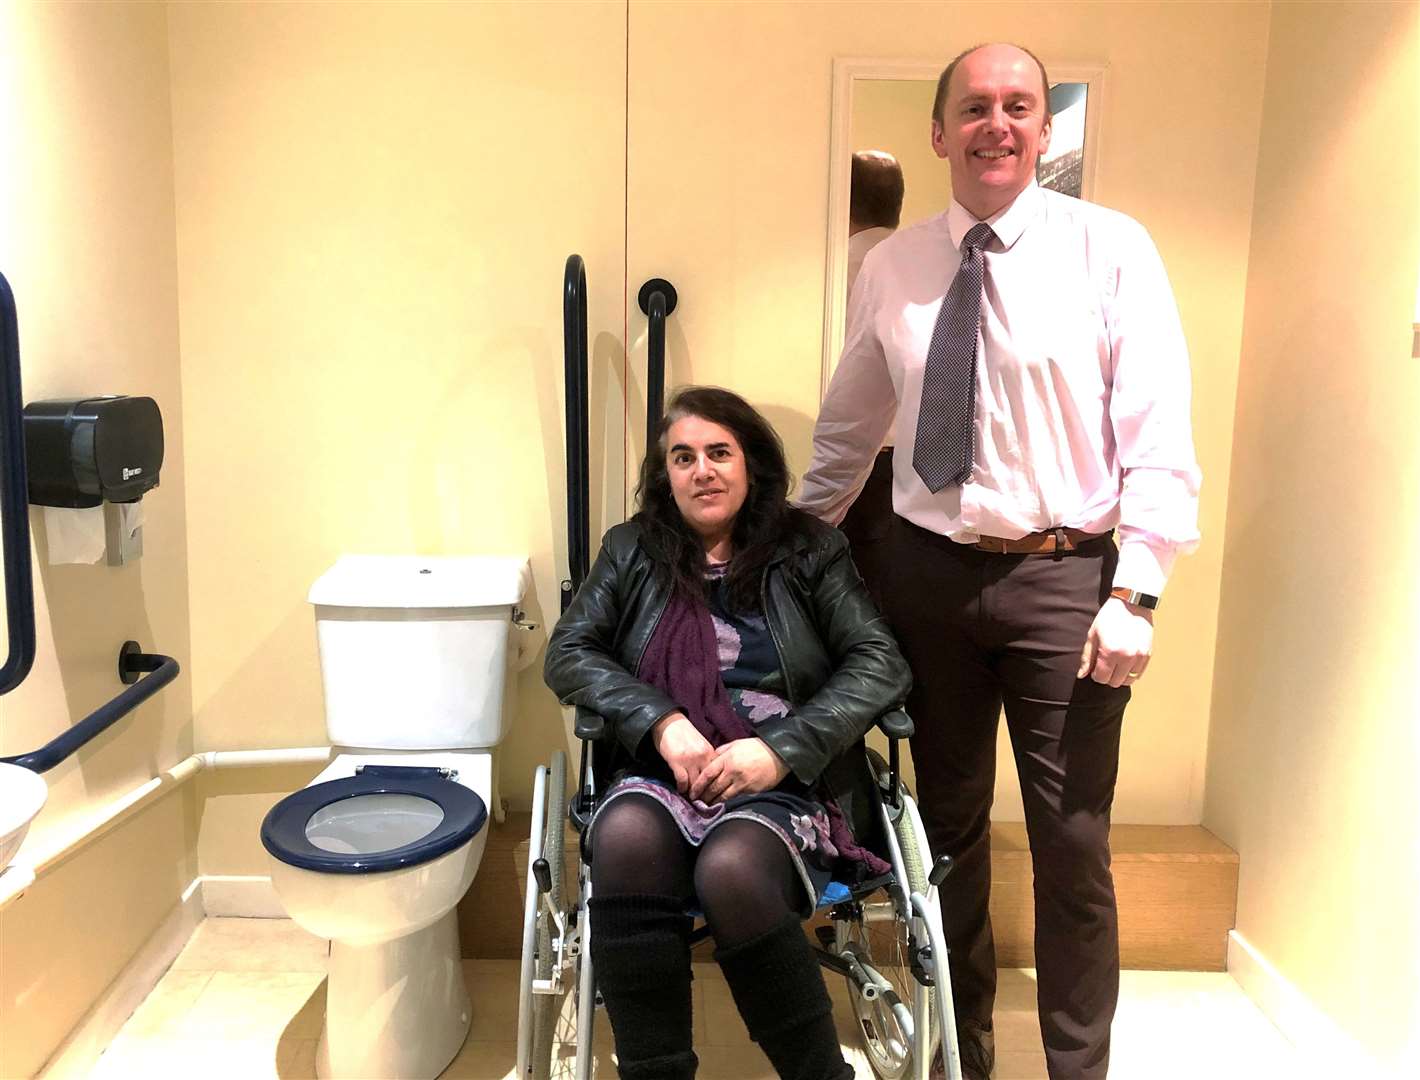 Louise Smith and Andrew Mackay in the Norseman Hotel's disabled toilet. Ms Smith campaigned to improve disabled access in numerous public toilets in Caithness.